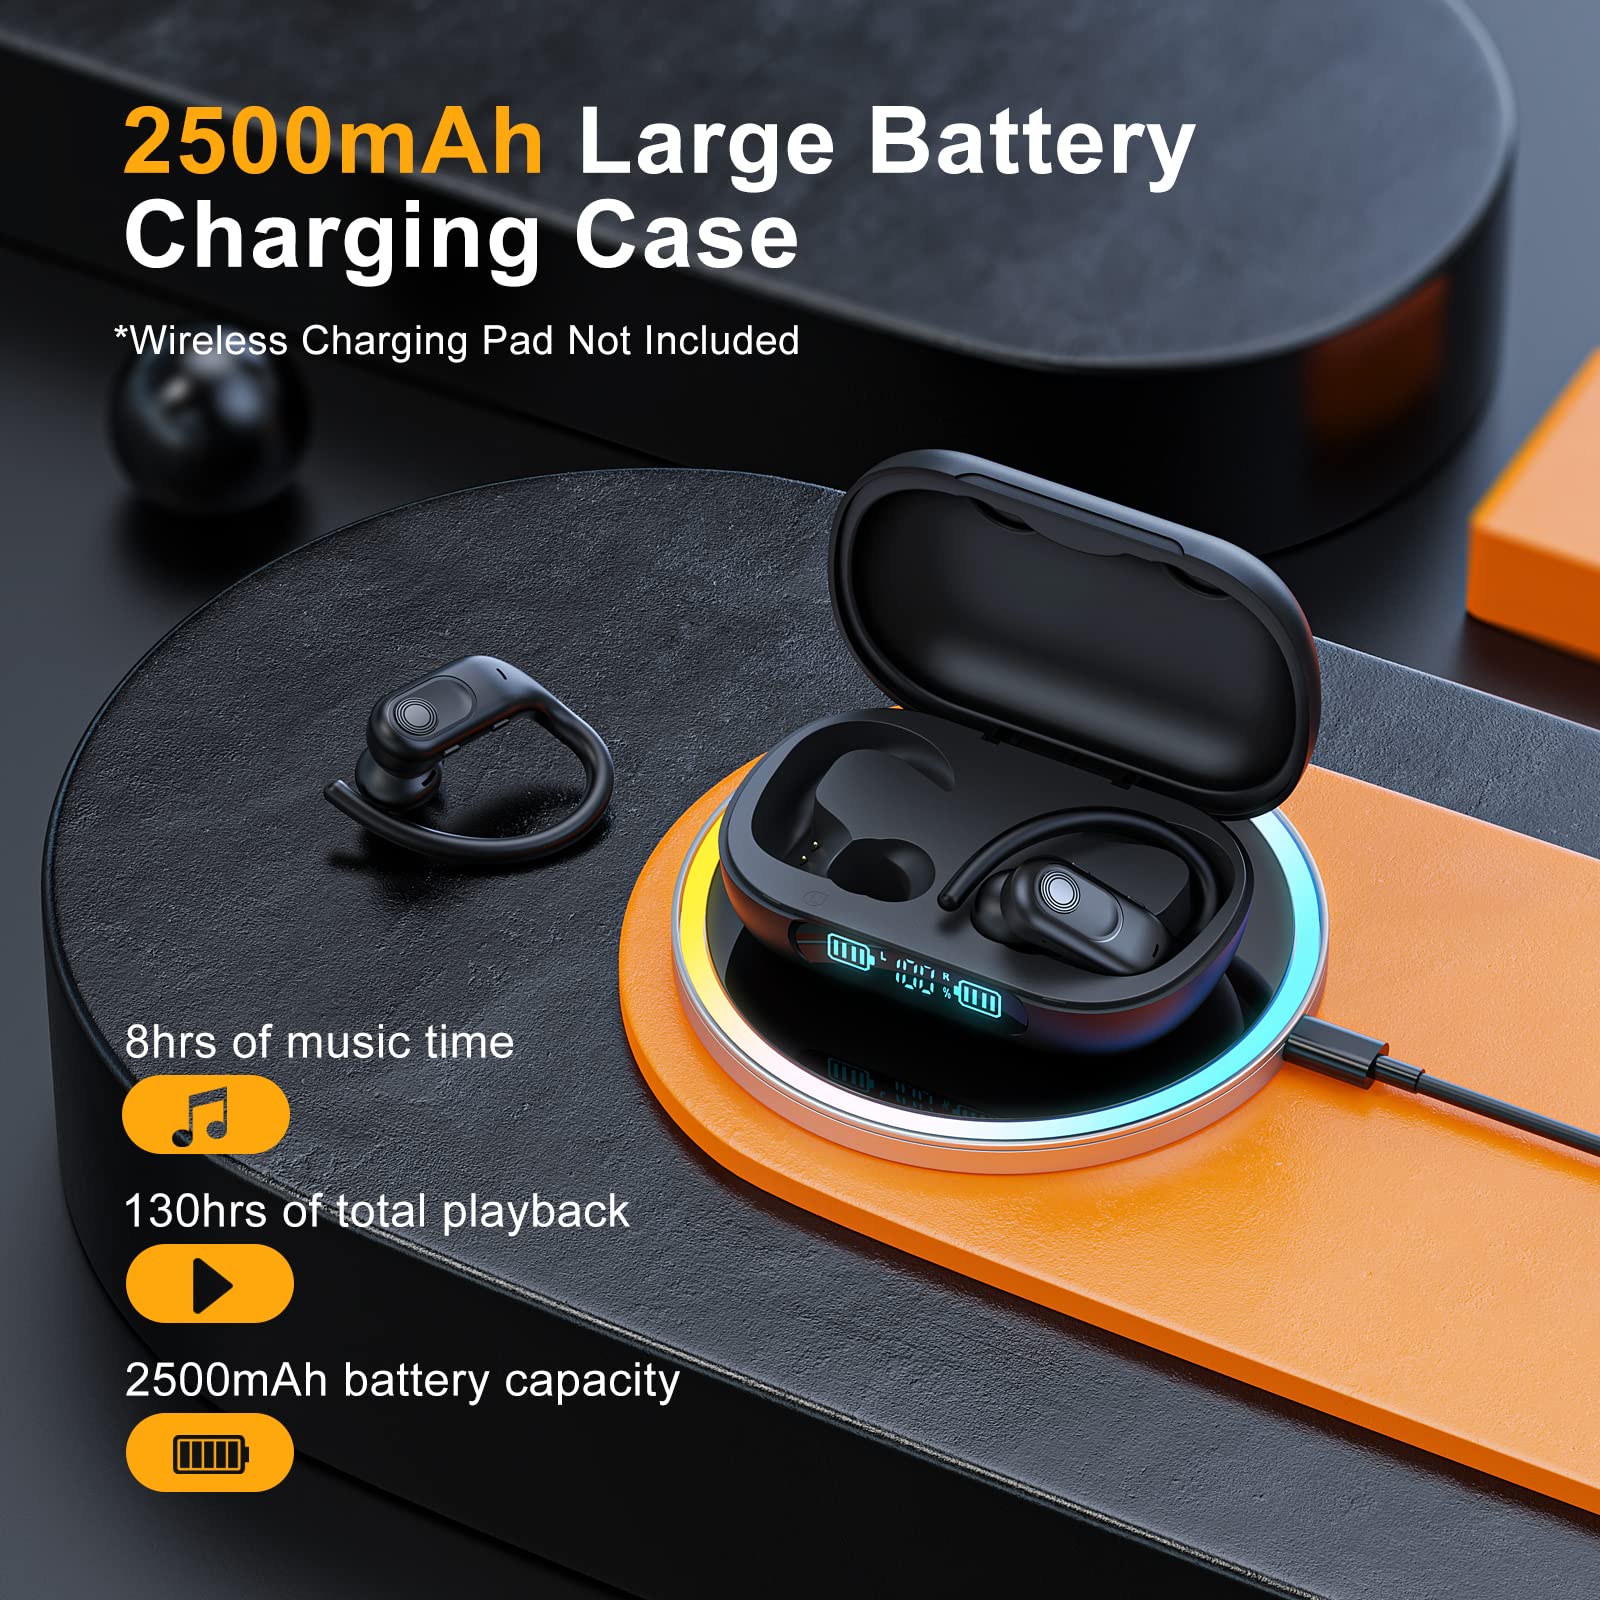 Wireless Earbuds Bluetooth Headphones 130Hrs Playtime with 2500mAh Wireless Charging Case LED Diaplay Hi-Fi Waterproof Over Ear Earphones for Sports Running Workout Gaming